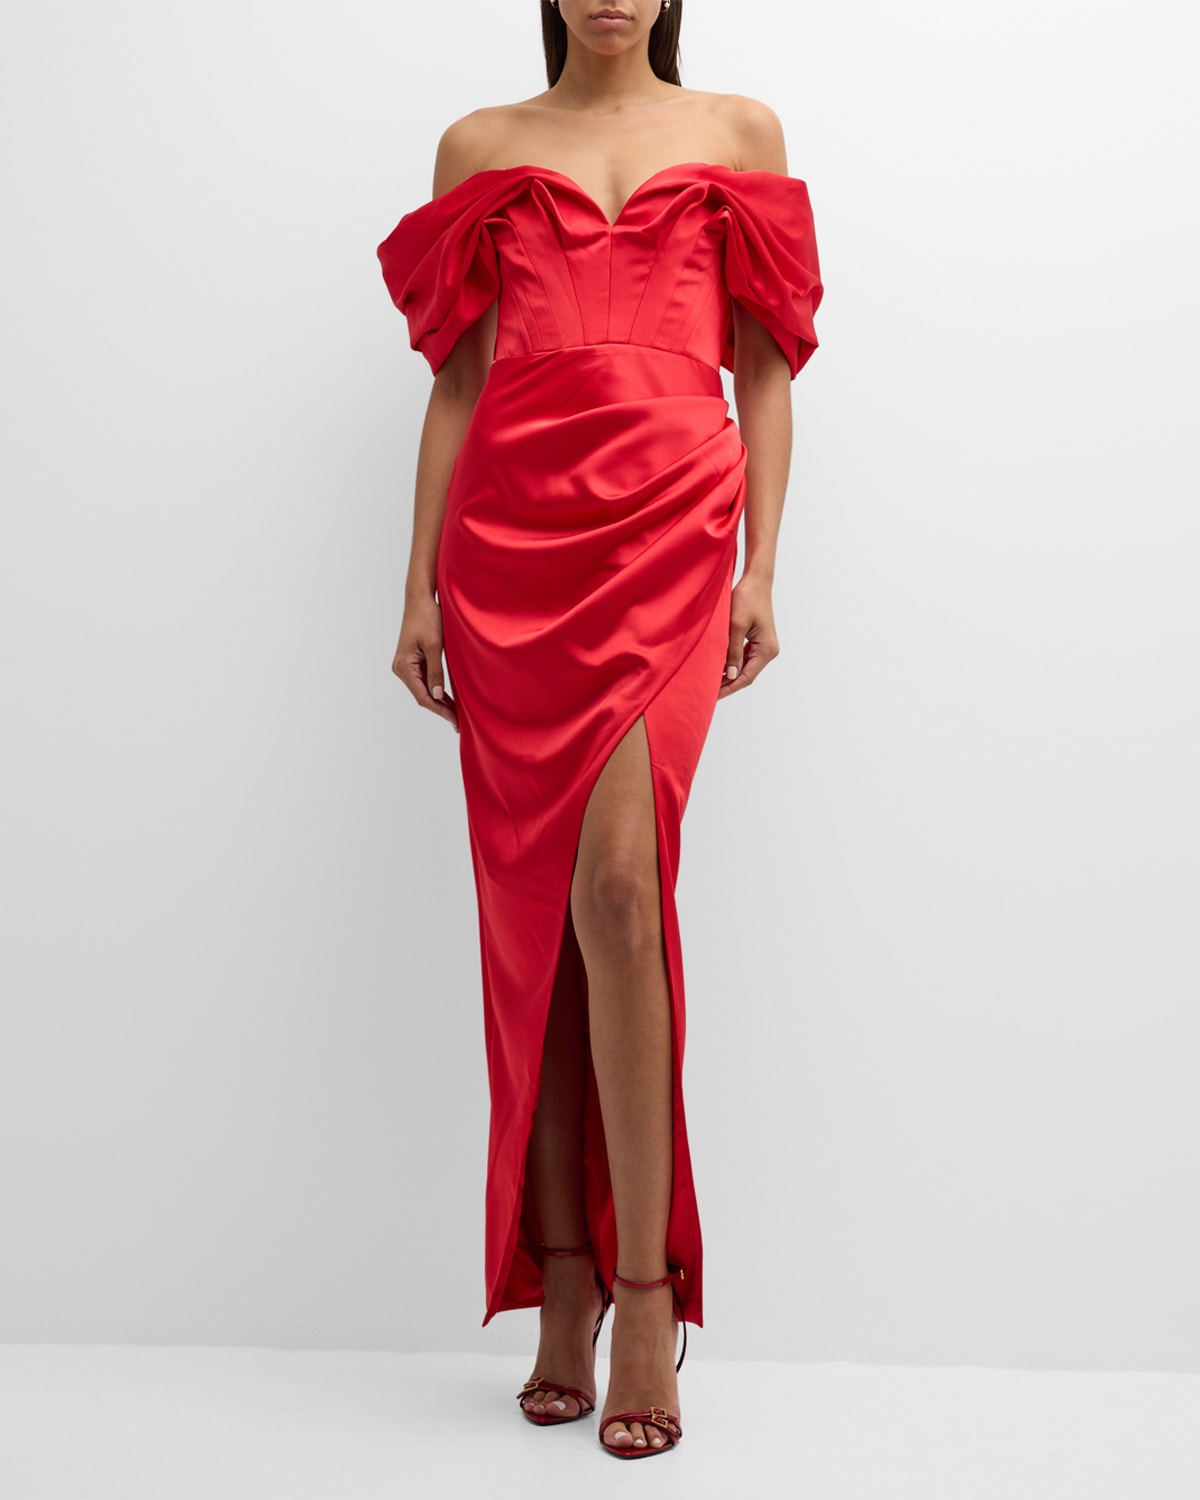 GIGII'S LAURA OFF-SHOULDER DRAPED COLUMN GOWN